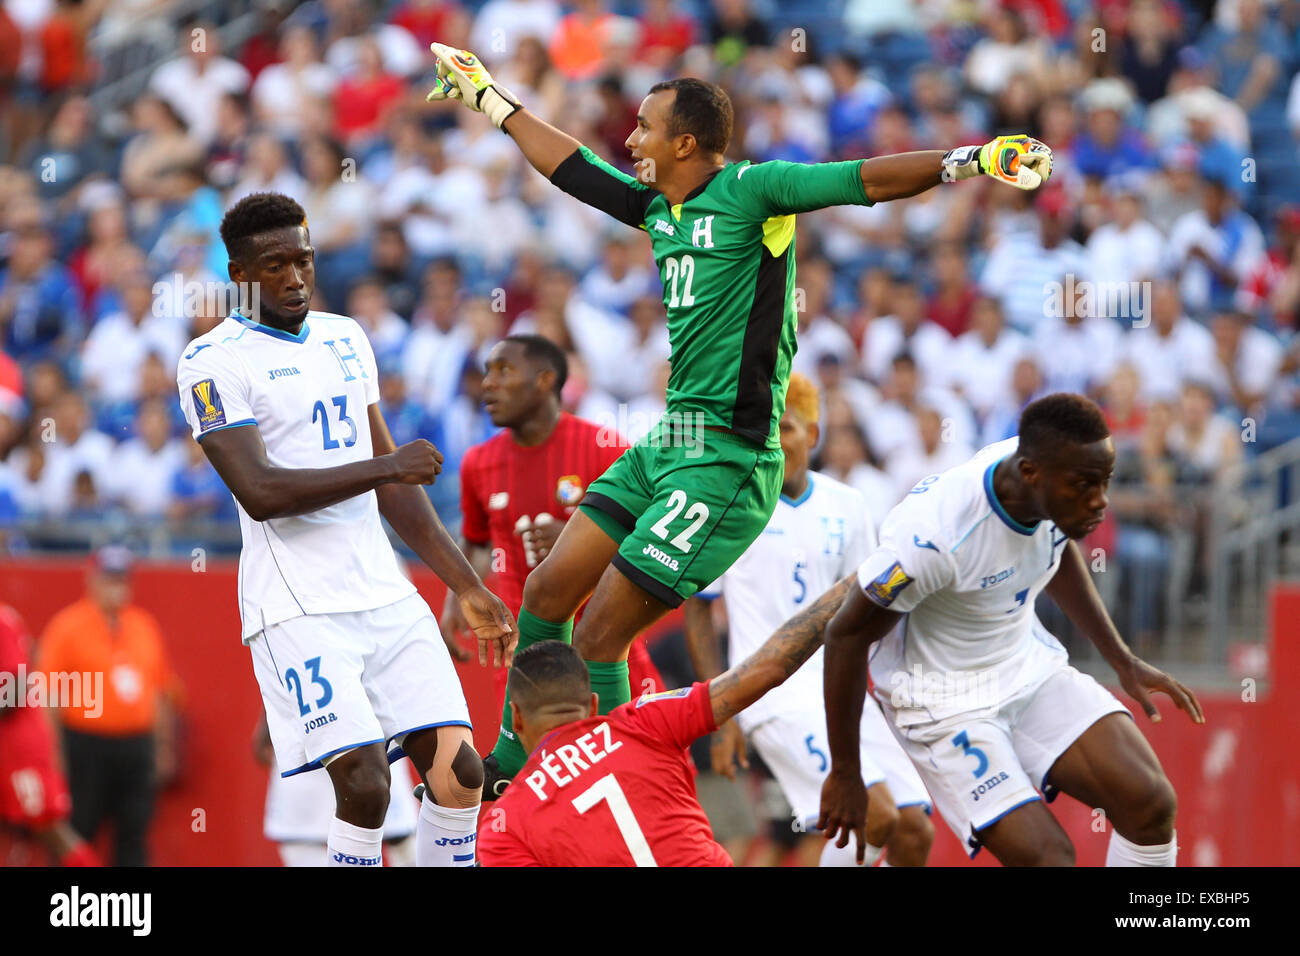 Foxborough, MA, USA. 10th July, 2015. Honduras goalkeeper Donis Escober (22) makes a save during the second half of the CONCACAF Gold Cup match between Panama and Honduras at Gillette Stadium. The match ended in a 1-1 tie. Anthony Nesmith/Cal Sport Media Credit:  Cal Sport Media/Alamy Live News Stock Photo